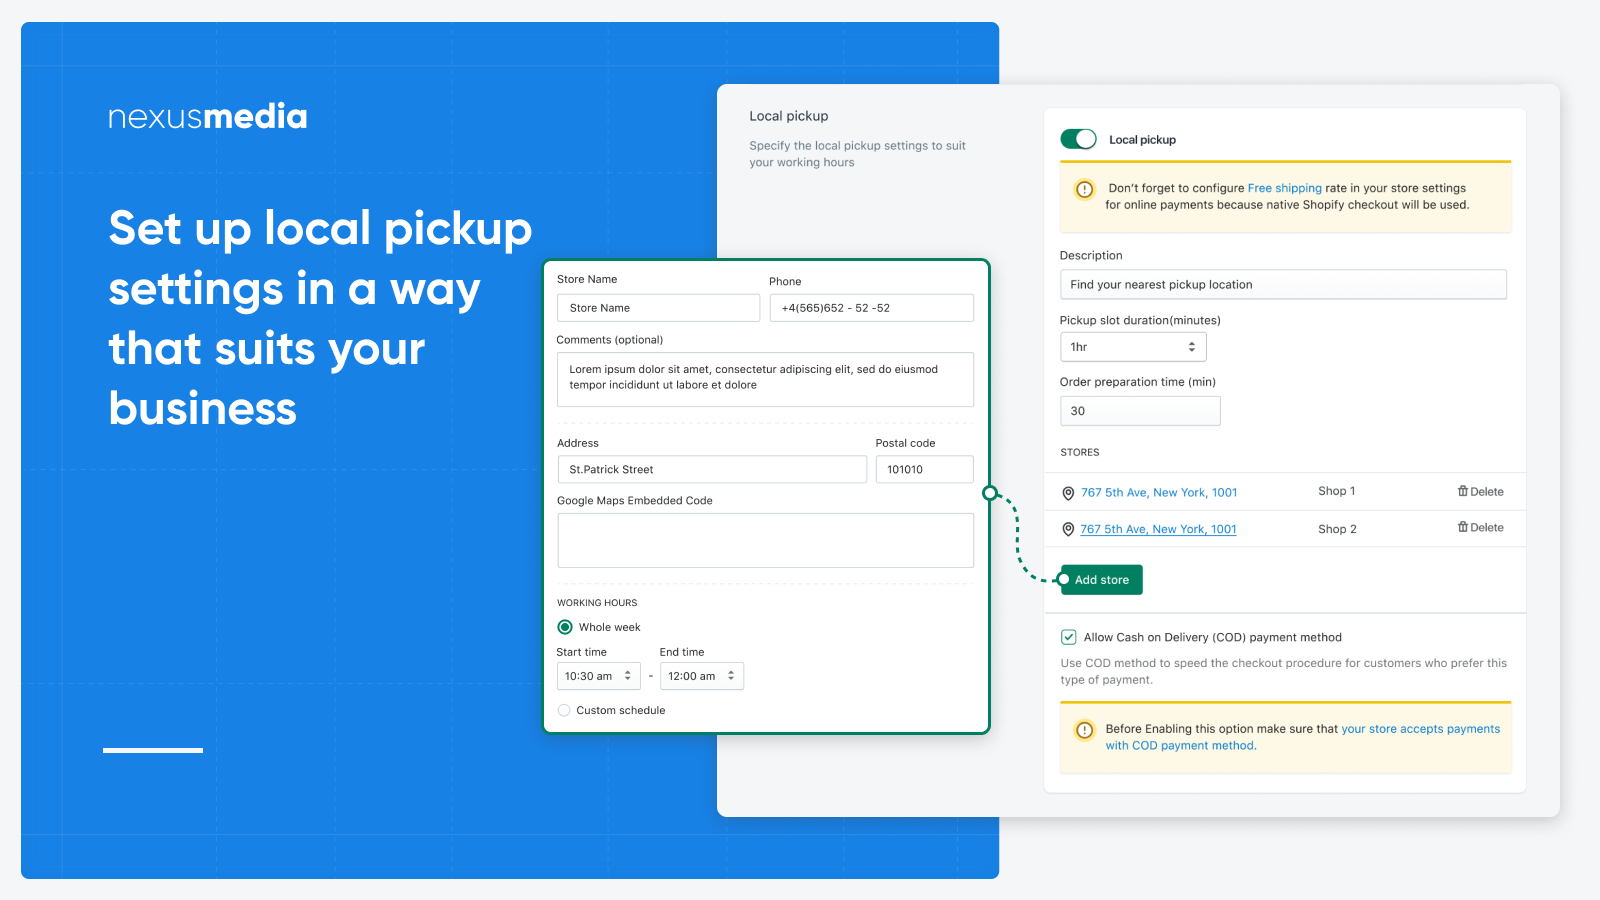 Smart tools for scheduling local pickups (takeout)